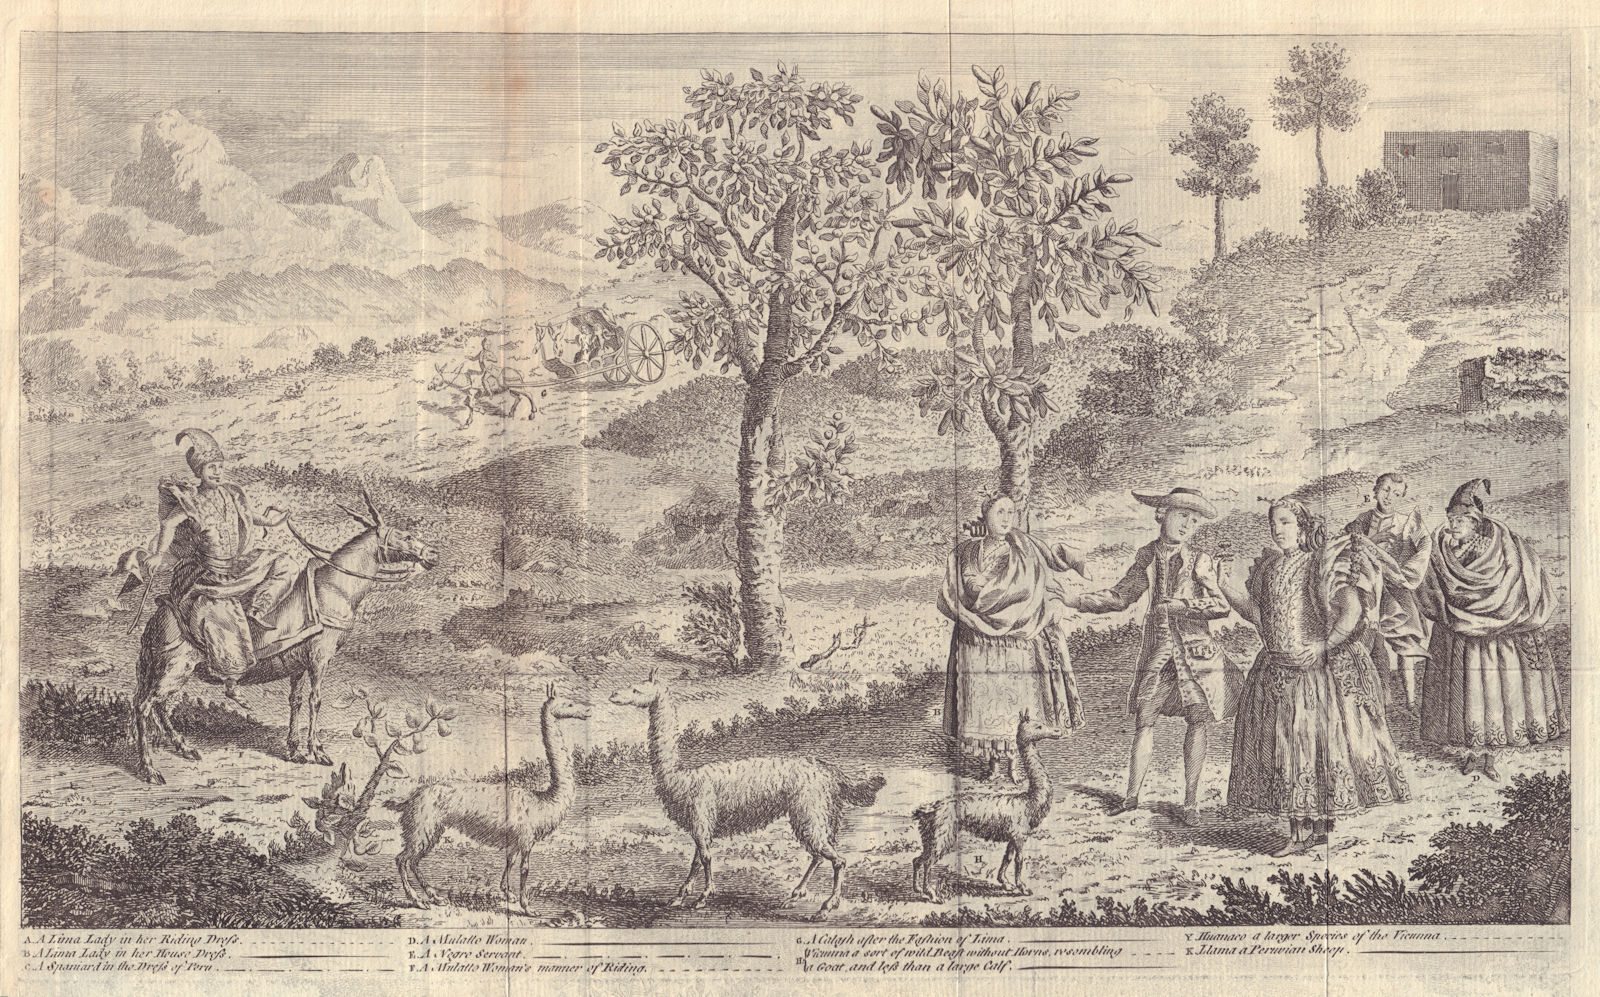 Inhabitants of Lima; their animals, the Vicuña and the Lama. Peru 1753 print